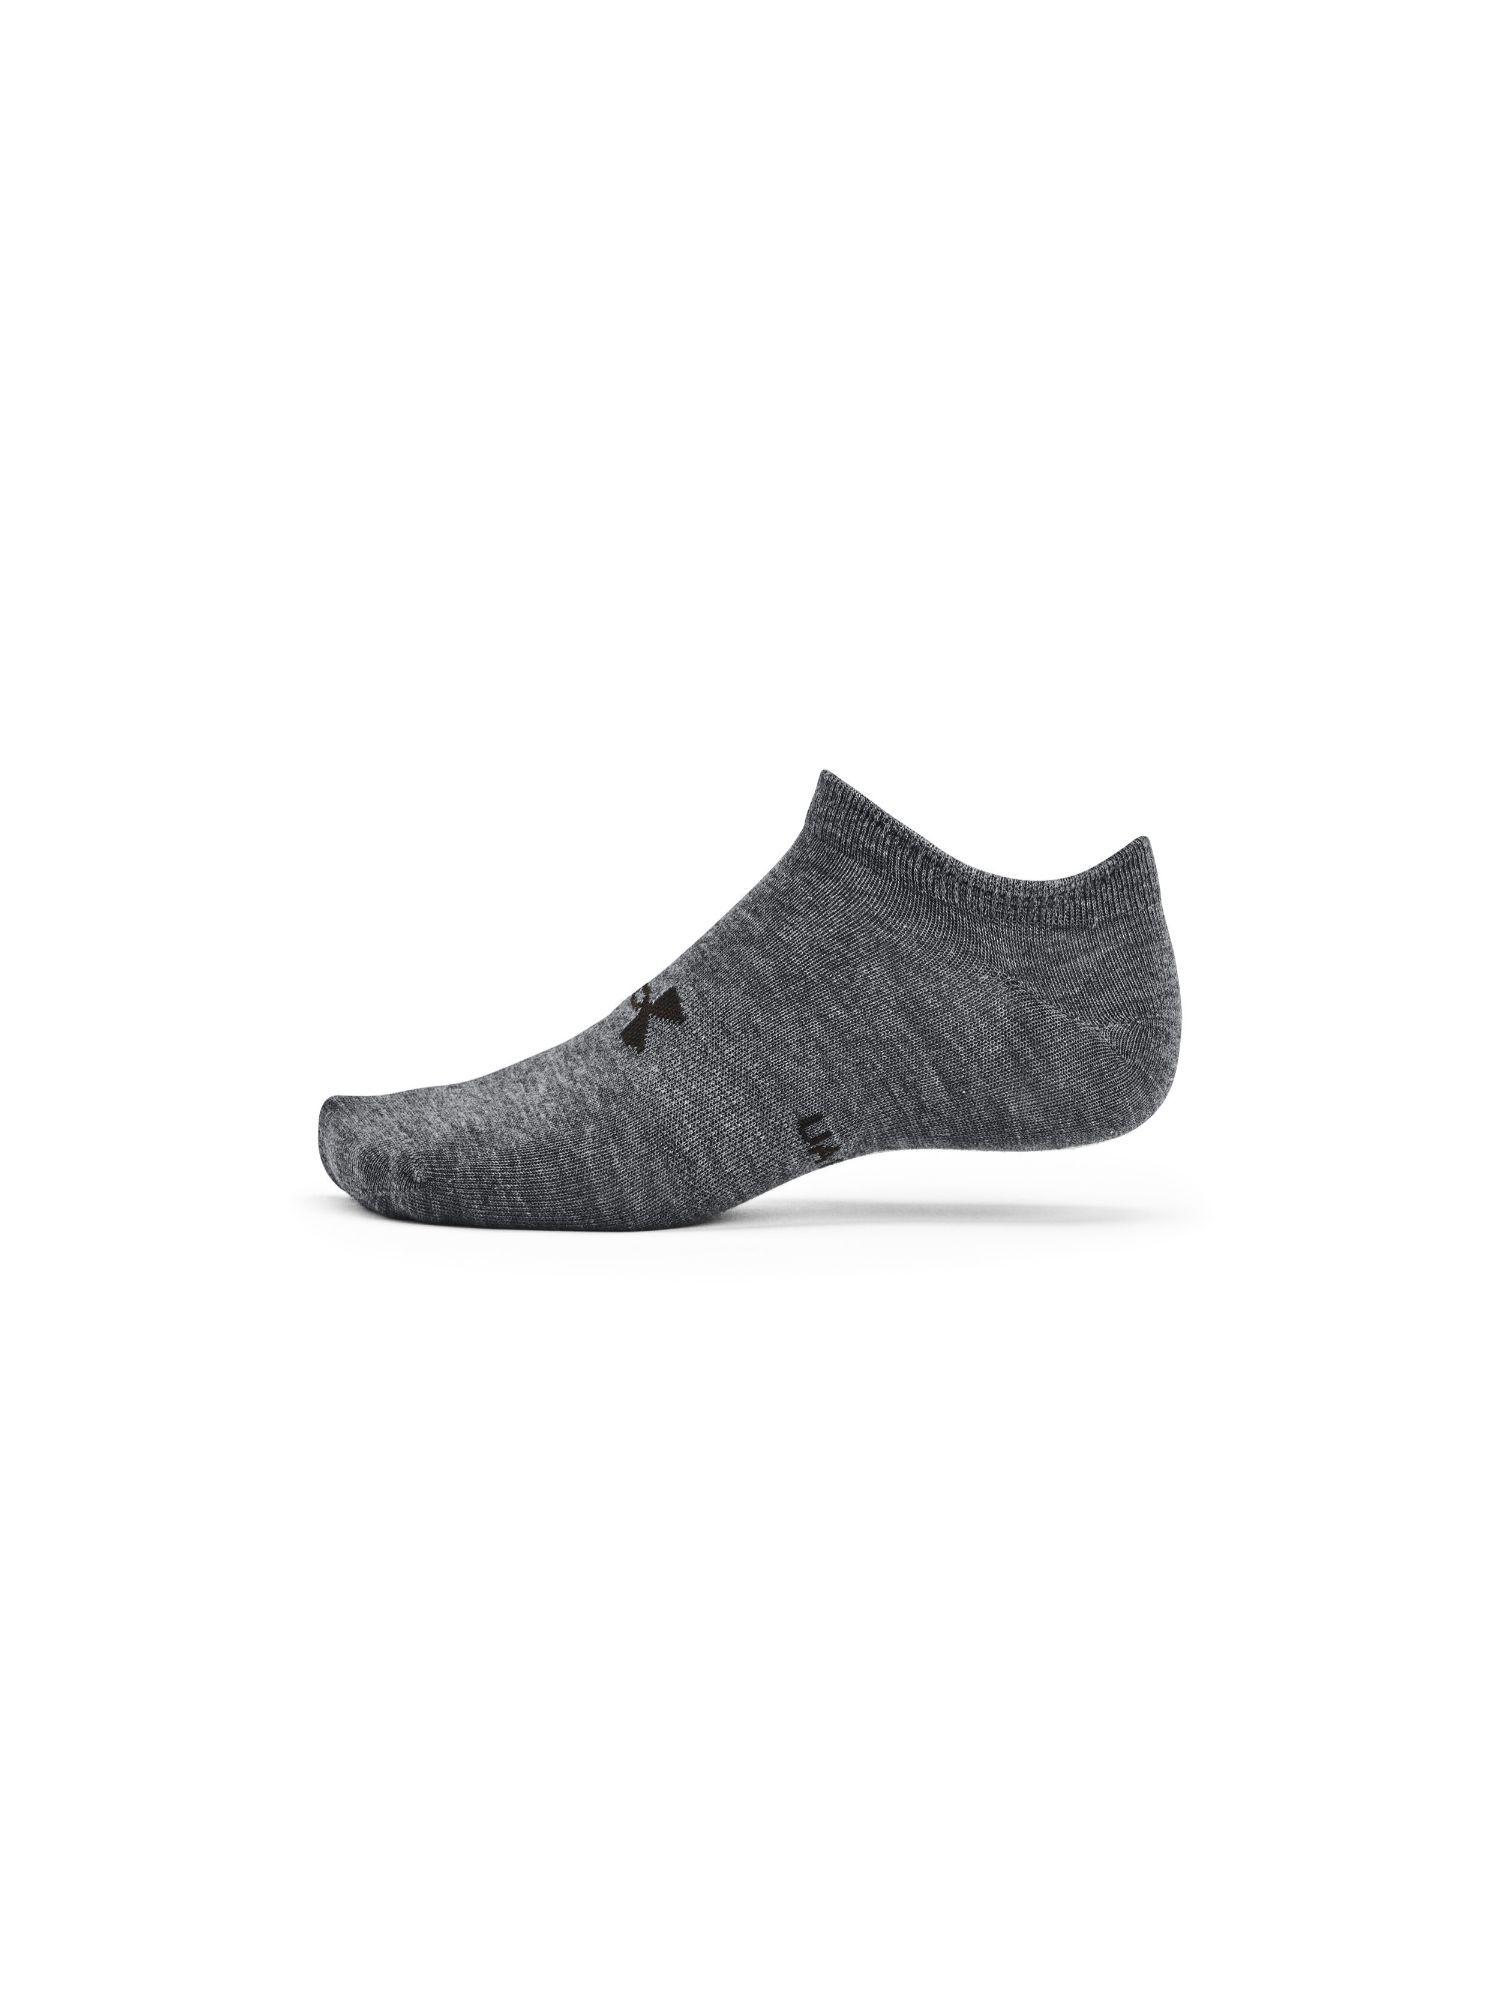 unisex essential no show socks - grey (pack of 3)